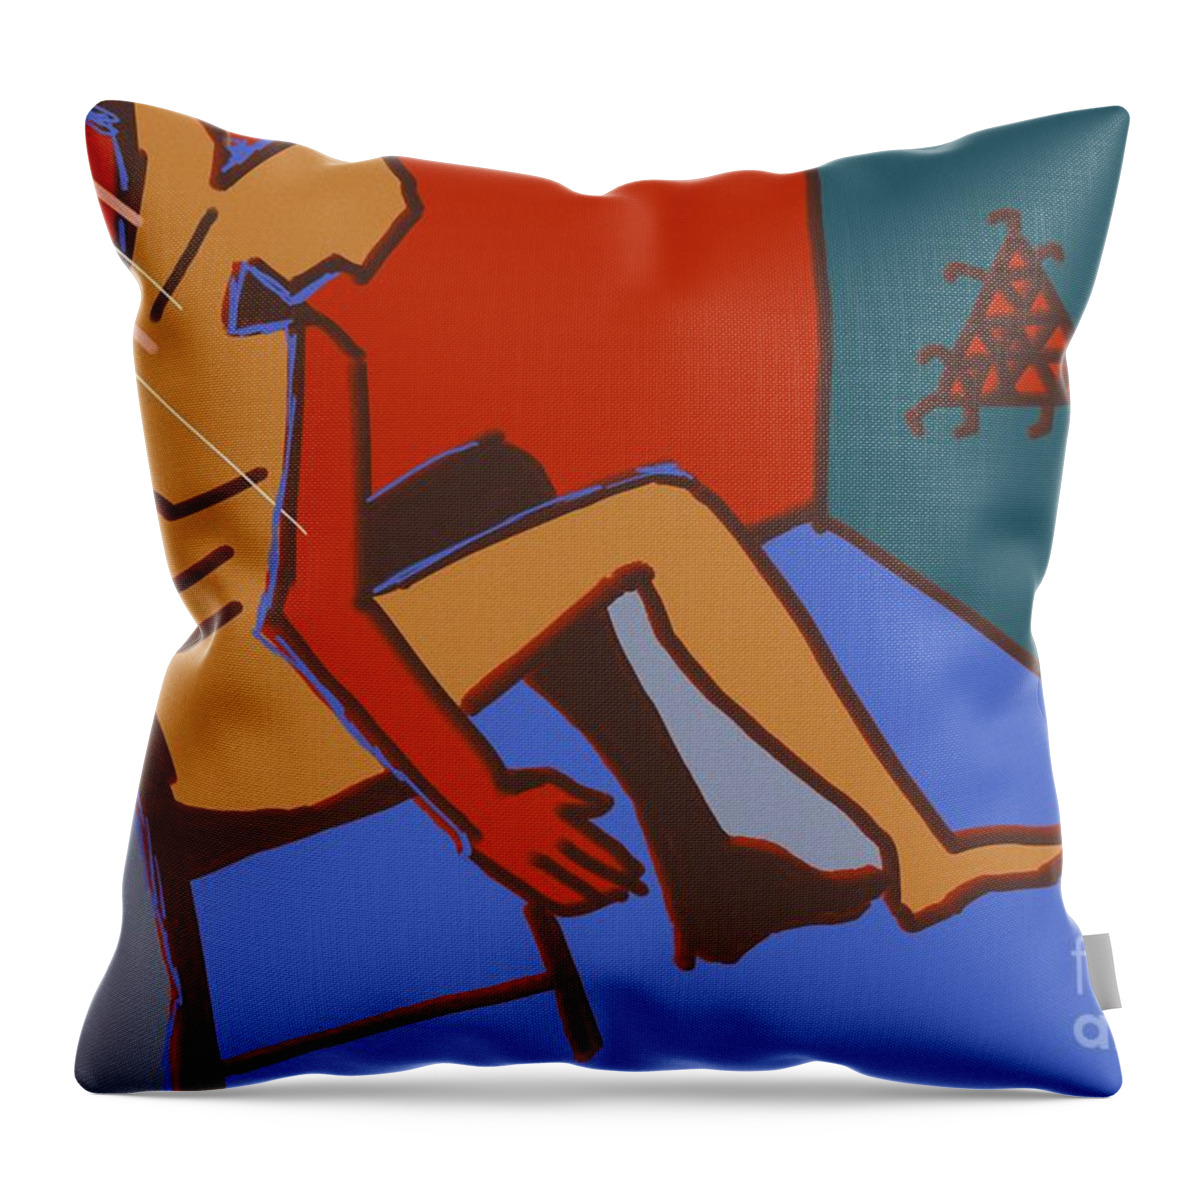 Cell Jail Thought Idea Change Penance Trapped Revolution Retreat Life Contrast Situation Throw Pillow featuring the painting Untitled 23 by Vilas Malankar